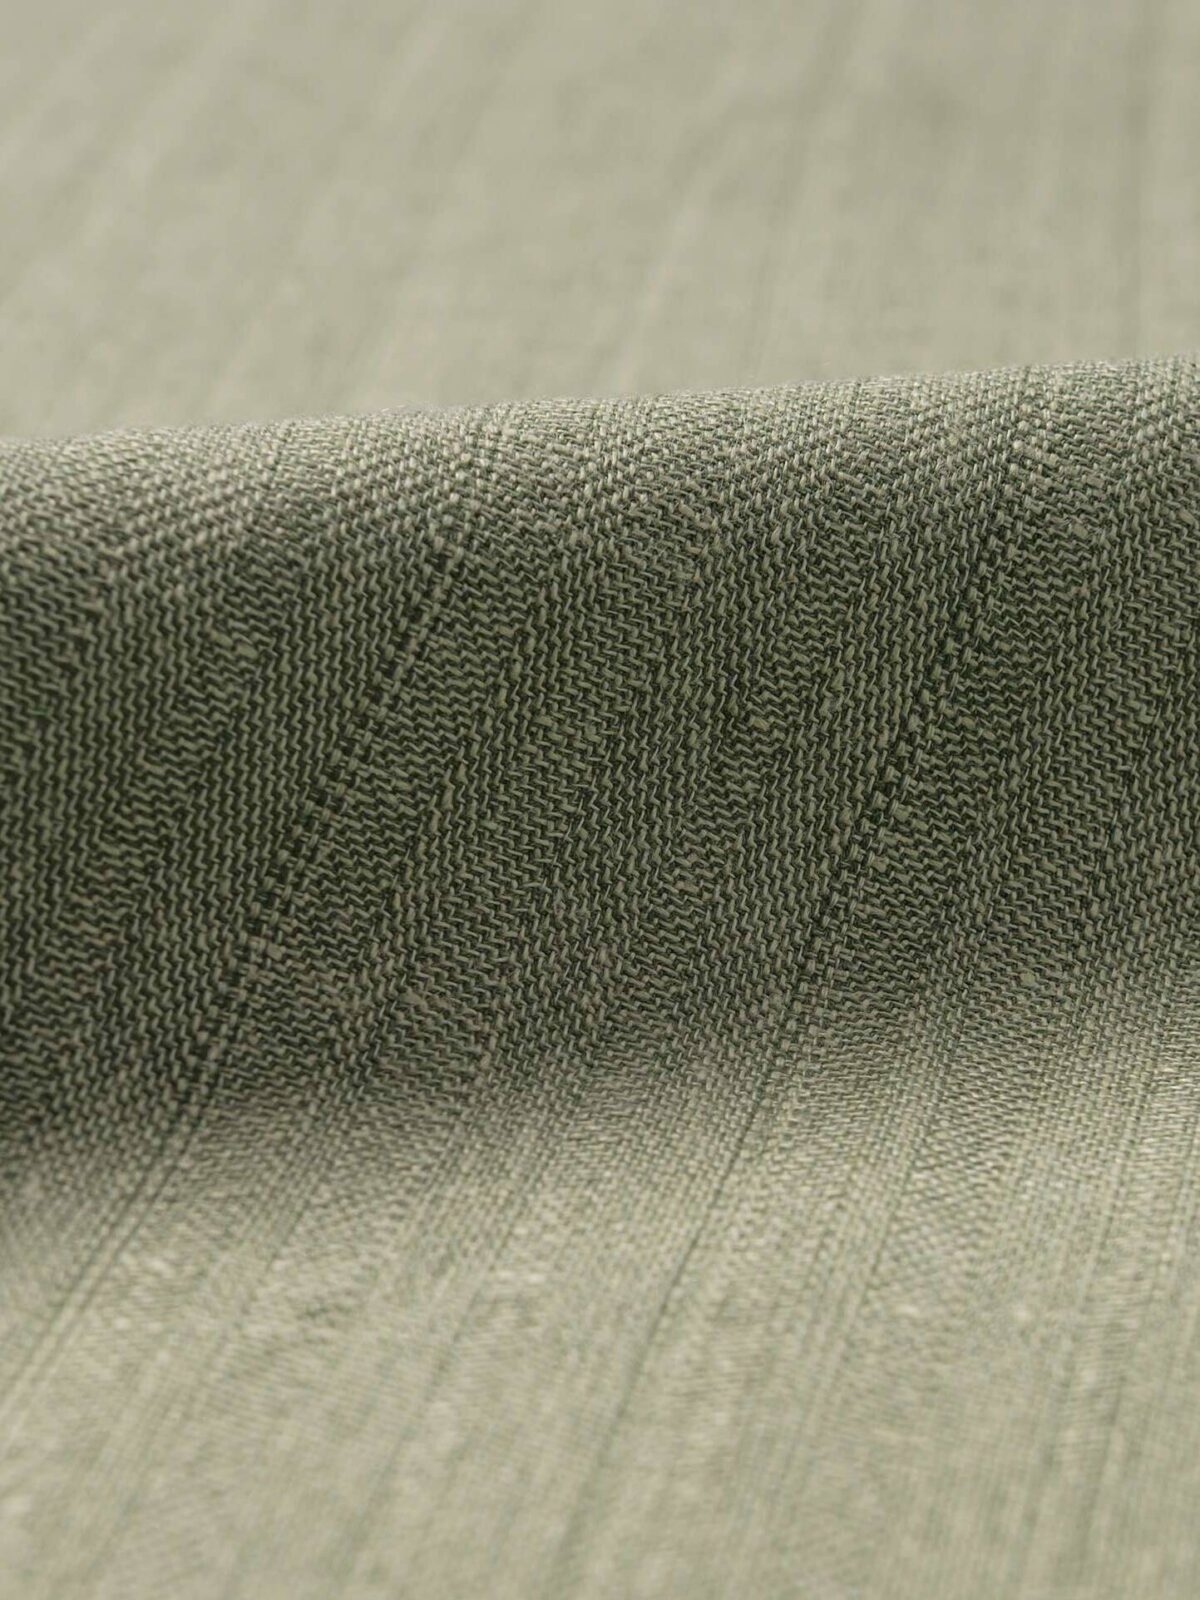 Linen vs. Cotton: Which Is Greener?